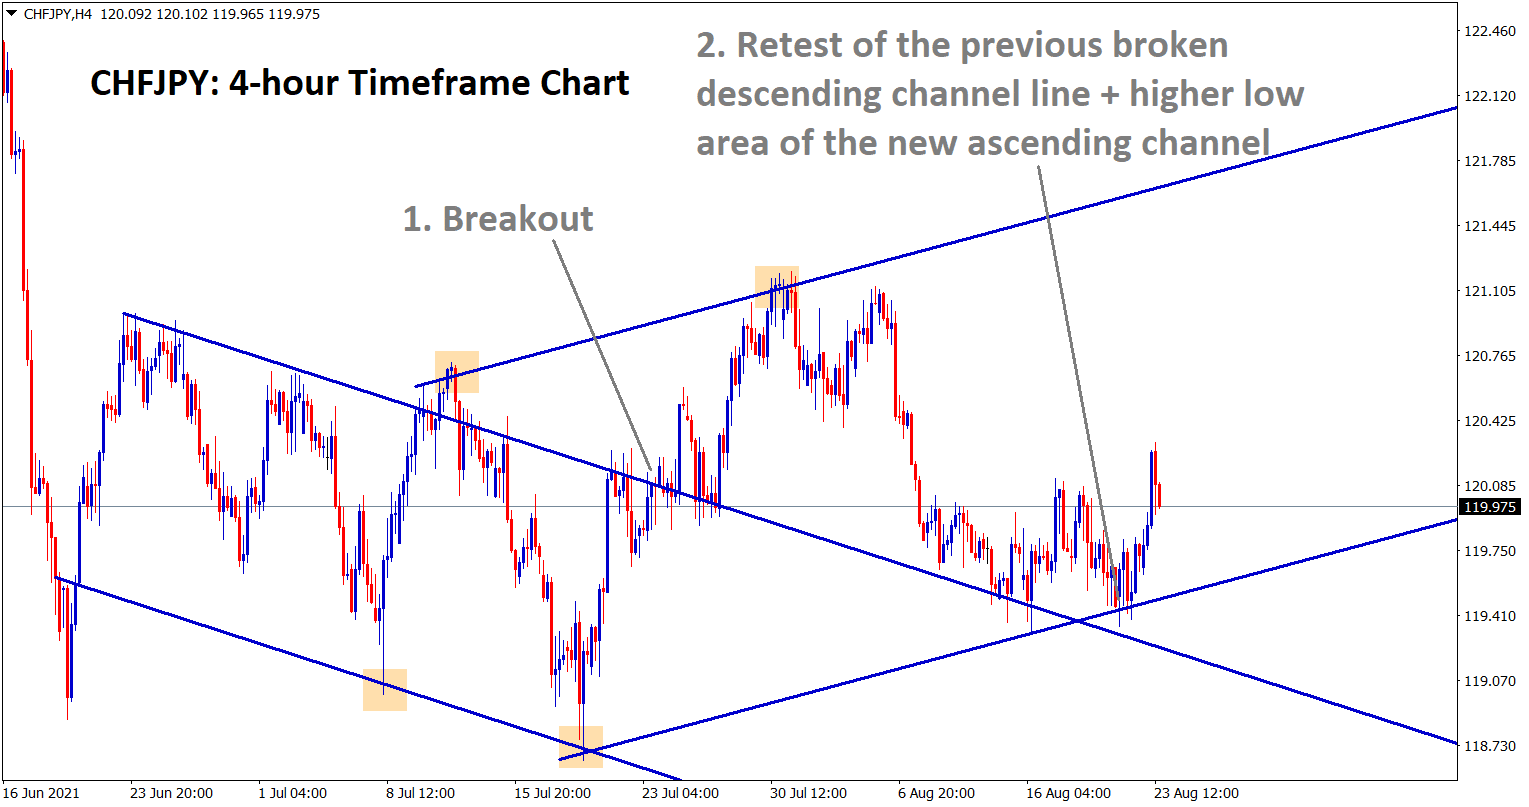 CHFJPY rebound from the retest zone of the previous broken descending channel line and the higher low area of new ascending channel